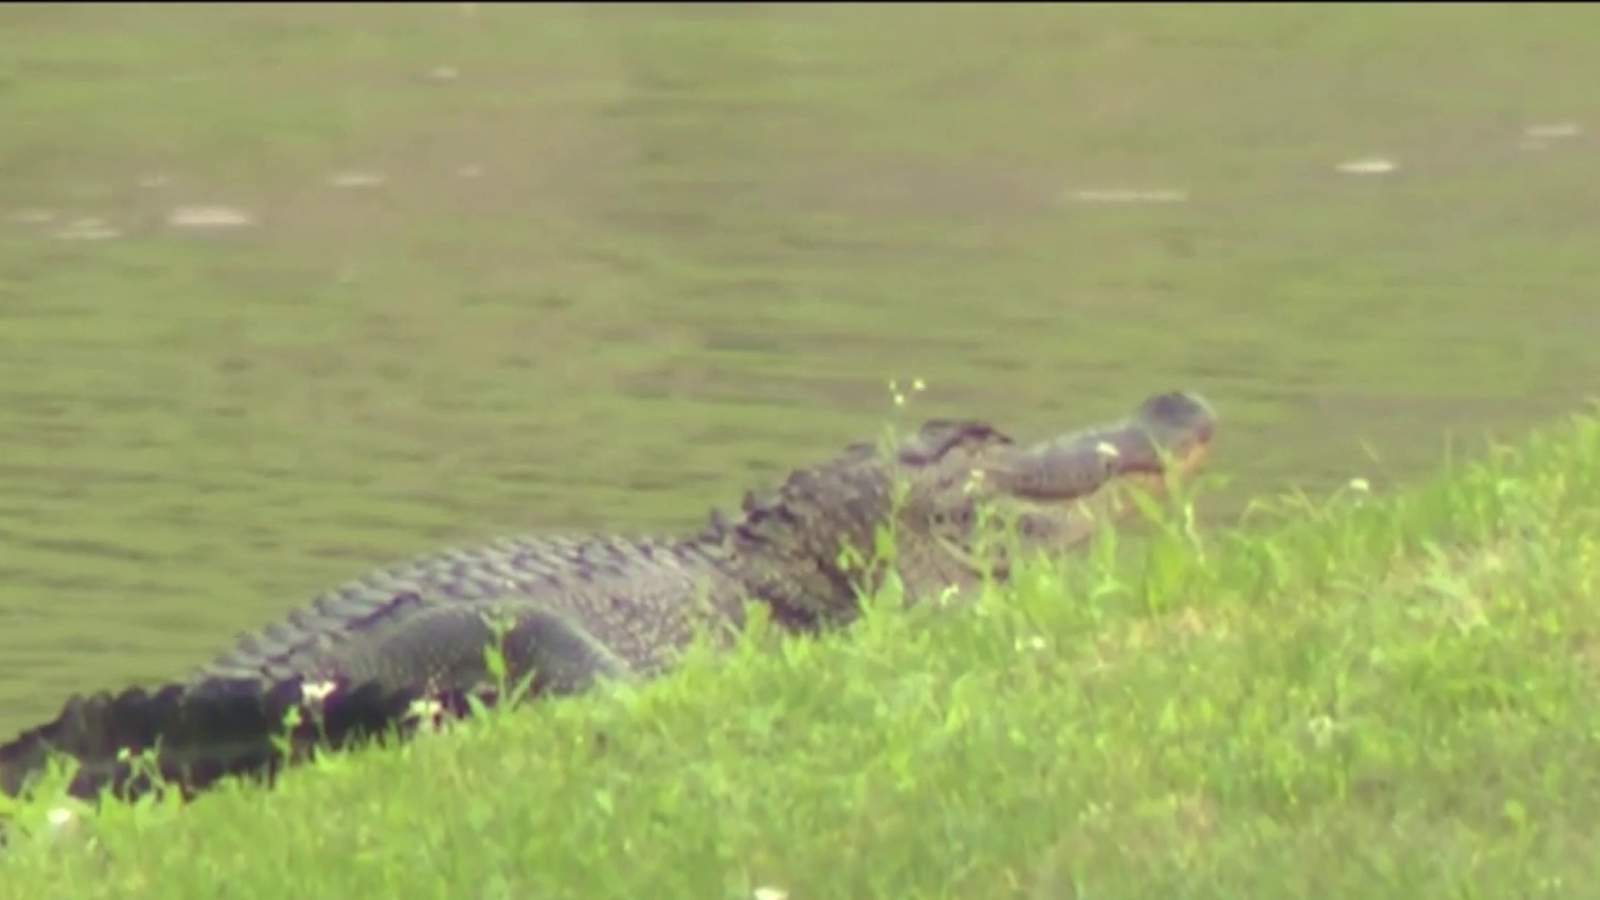 Residents discover 6-foot alligator in Richmond neighborhood pond